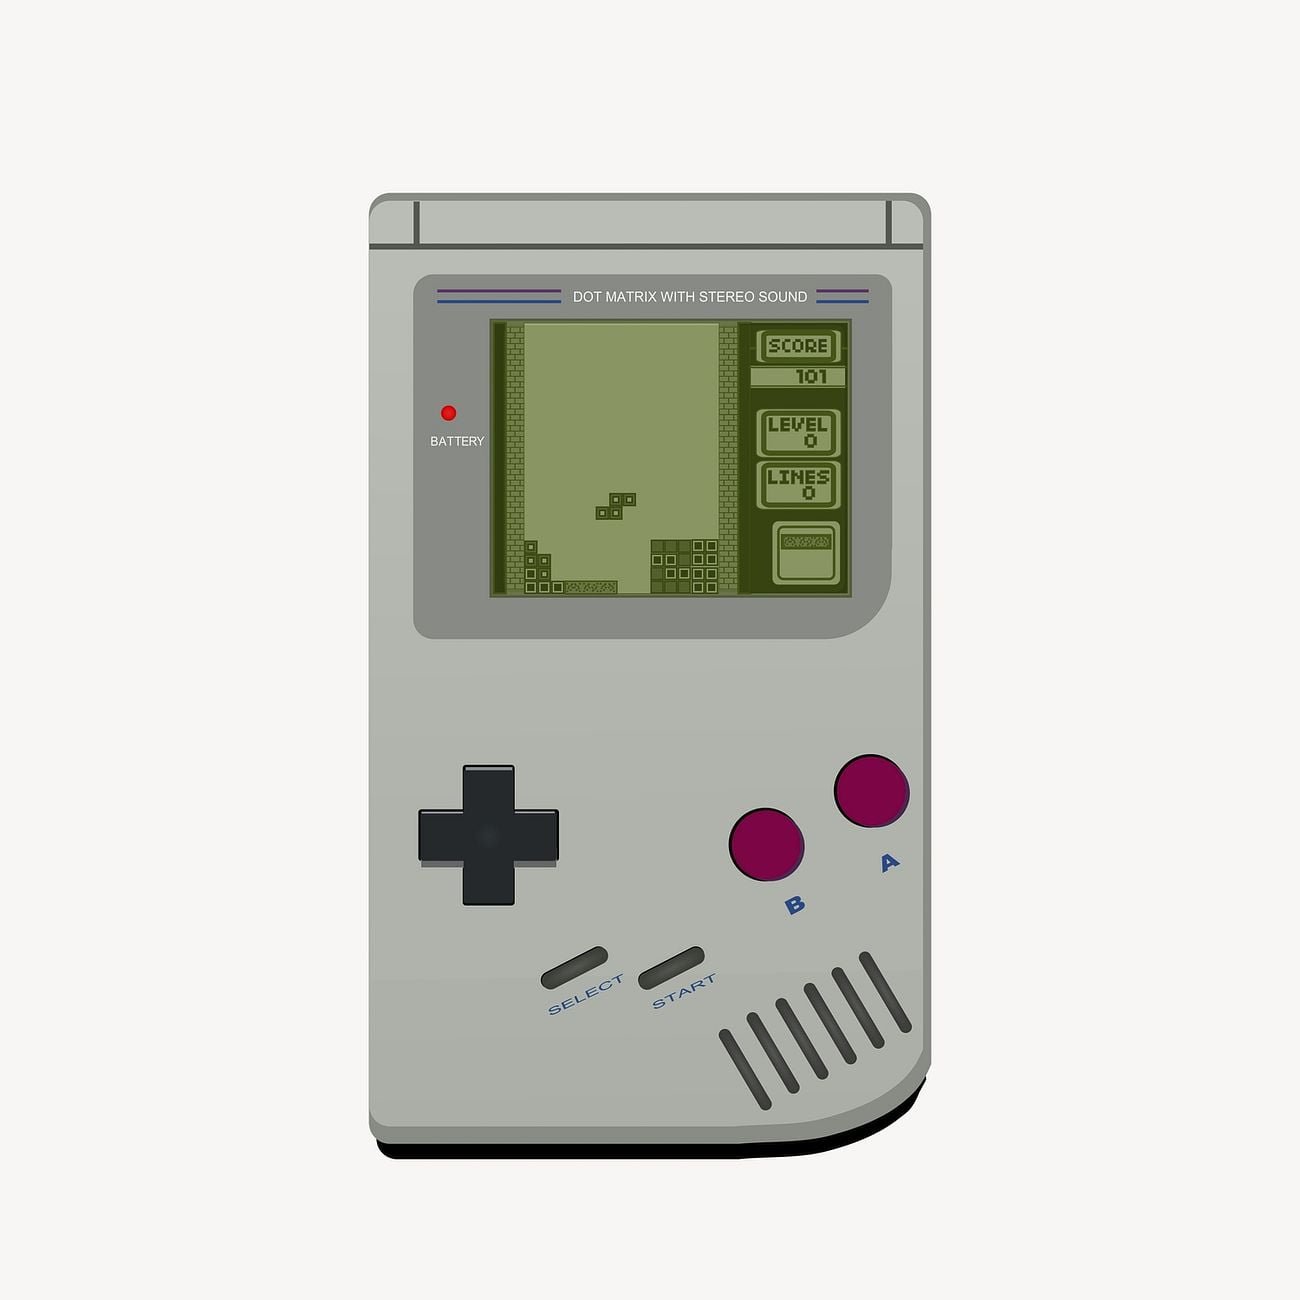 Retro gameboy clipart, gaming console